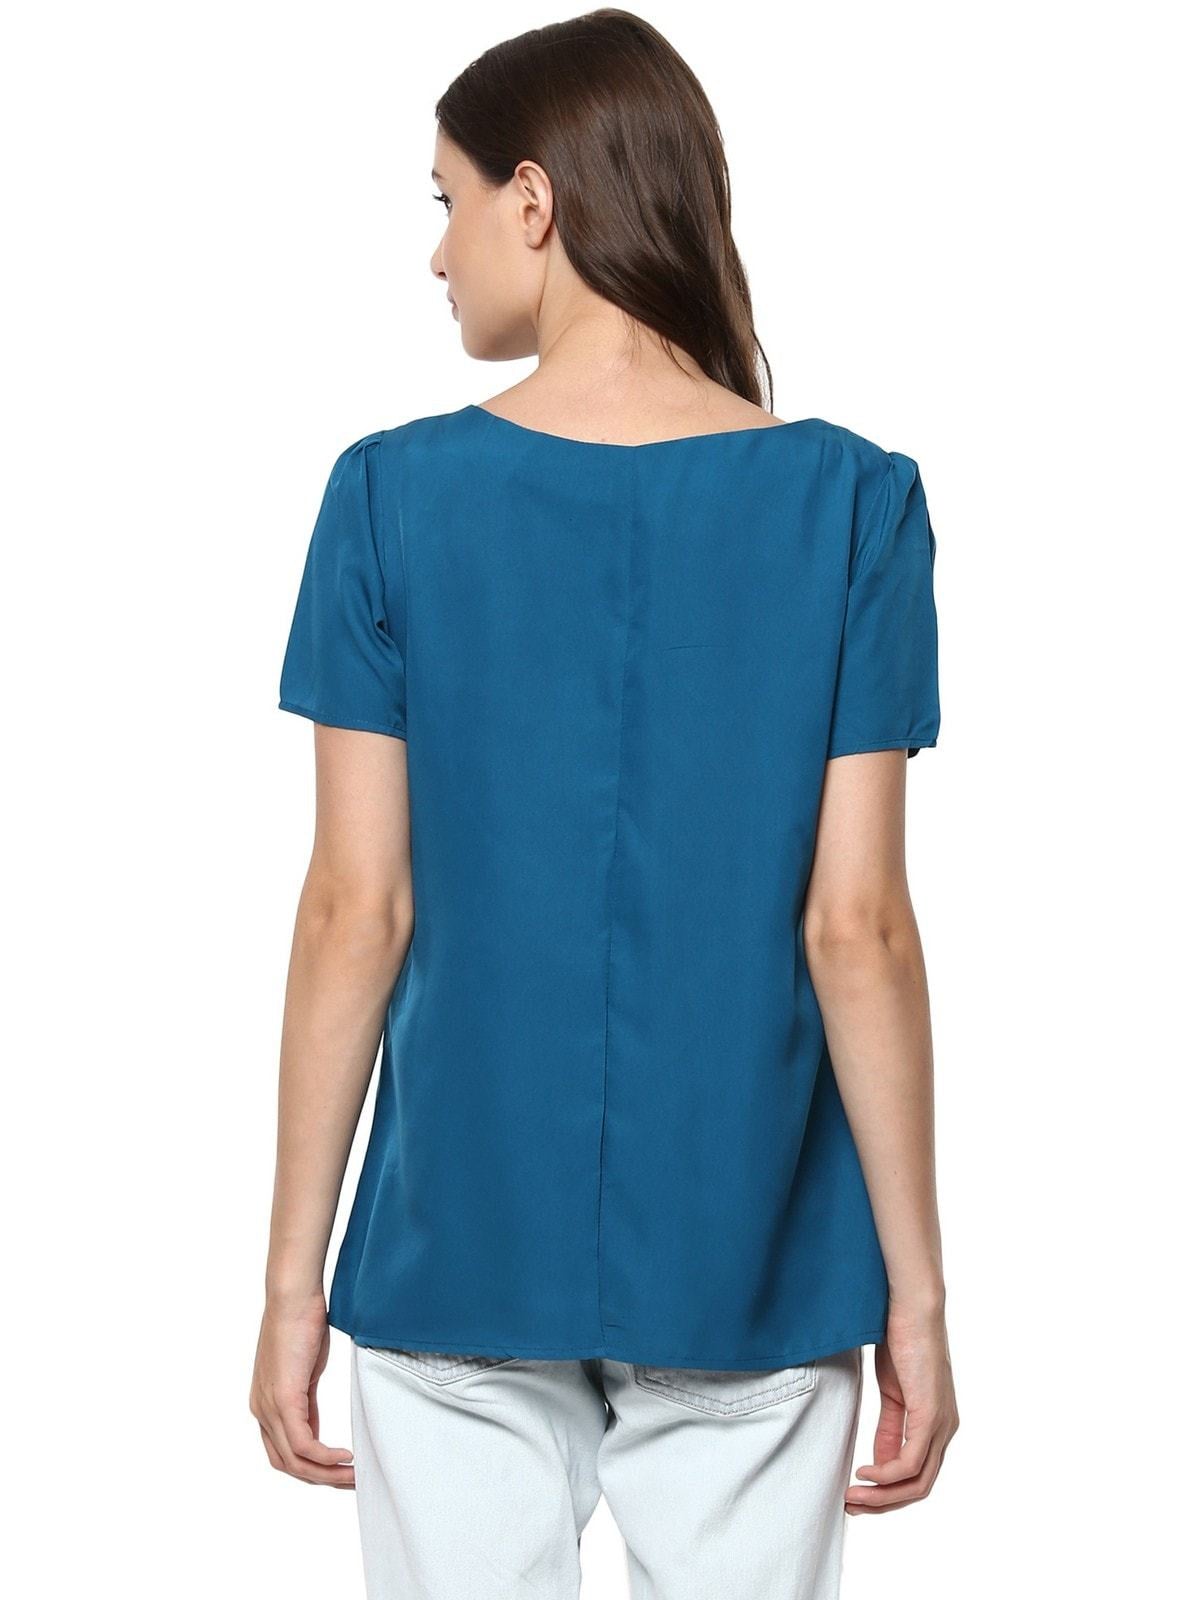 Women's Blue Top Detailed With Gathered Sleeves And Diagonal Zip - Pannkh